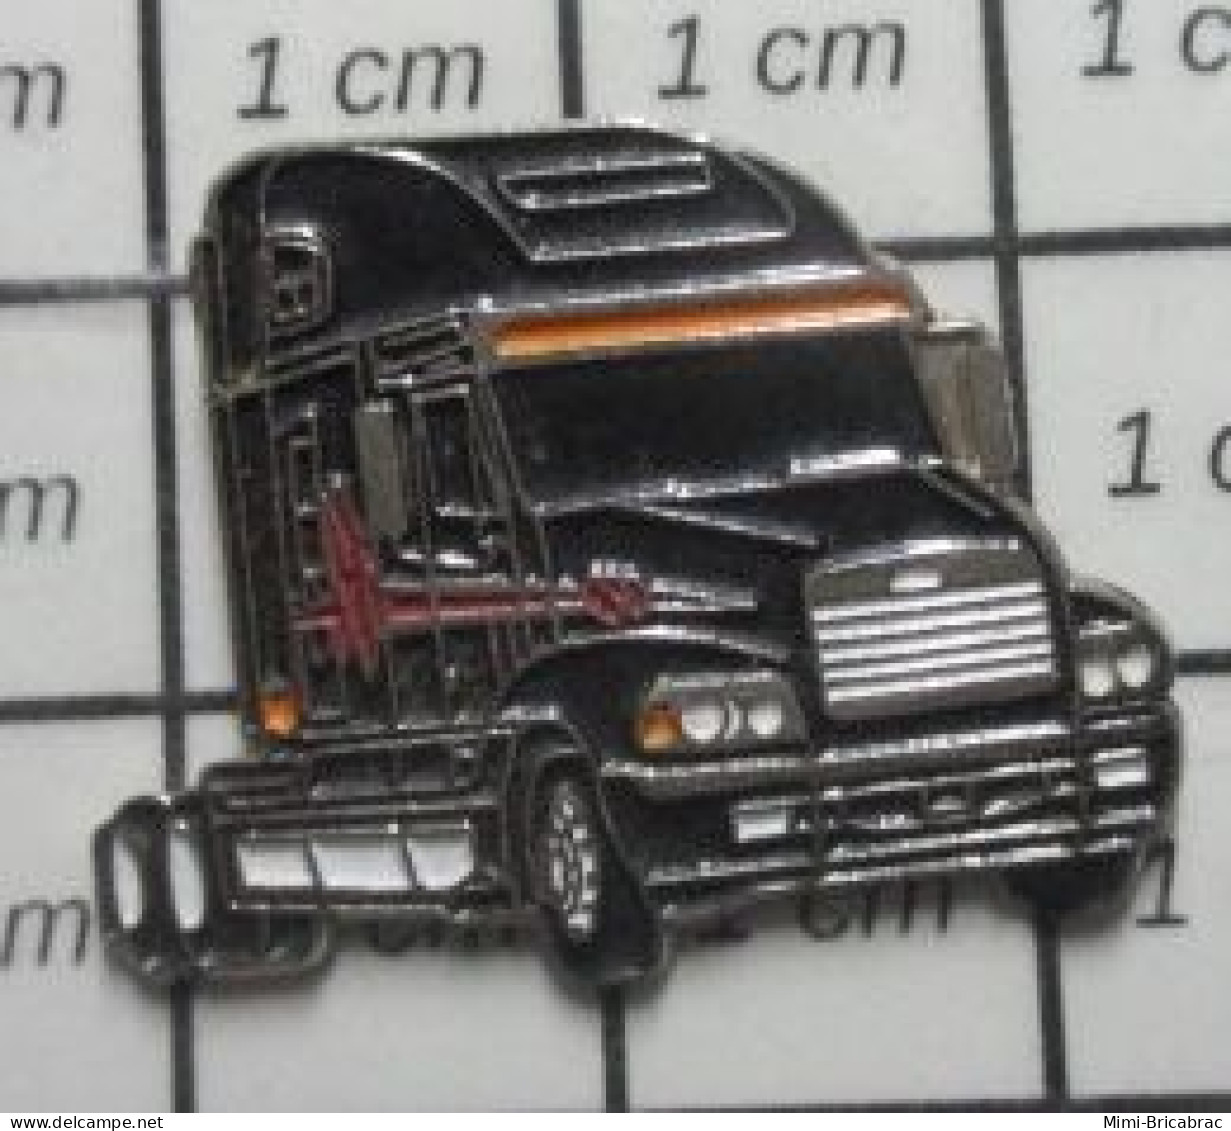 912B Pin's Pins / Beau Et Rare / TRANSPORTS / GROS CAMION NOIR STYLE AMERICAIN FREIGHTLINER C120 - Transports